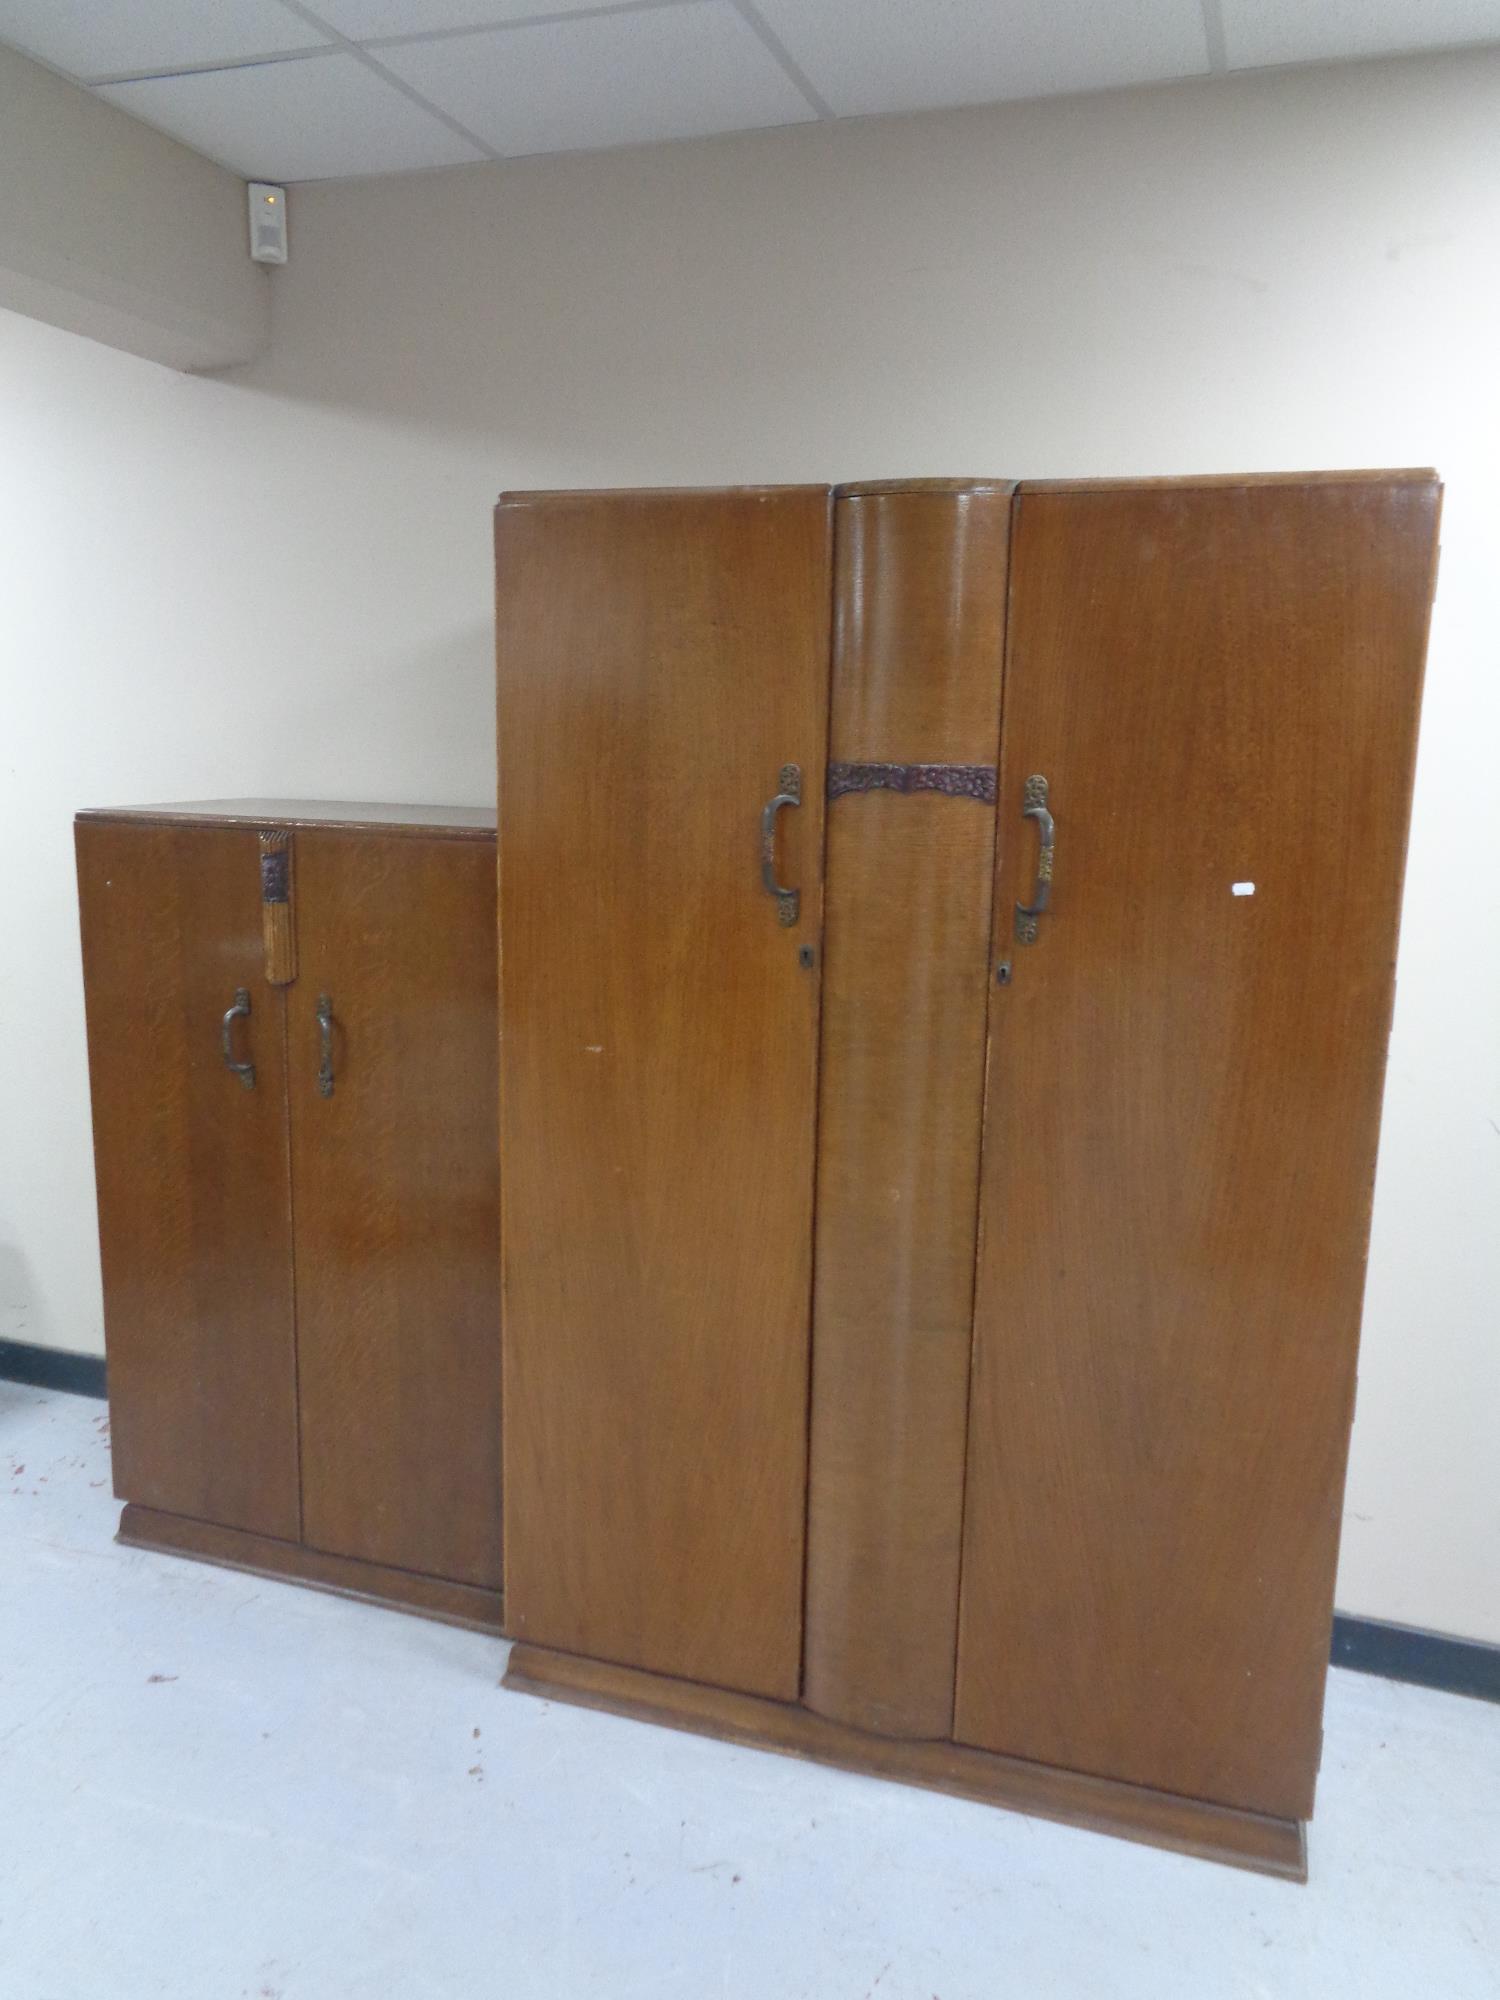 A 20th century Distinctive Furniture lady's and gents wardrobe.